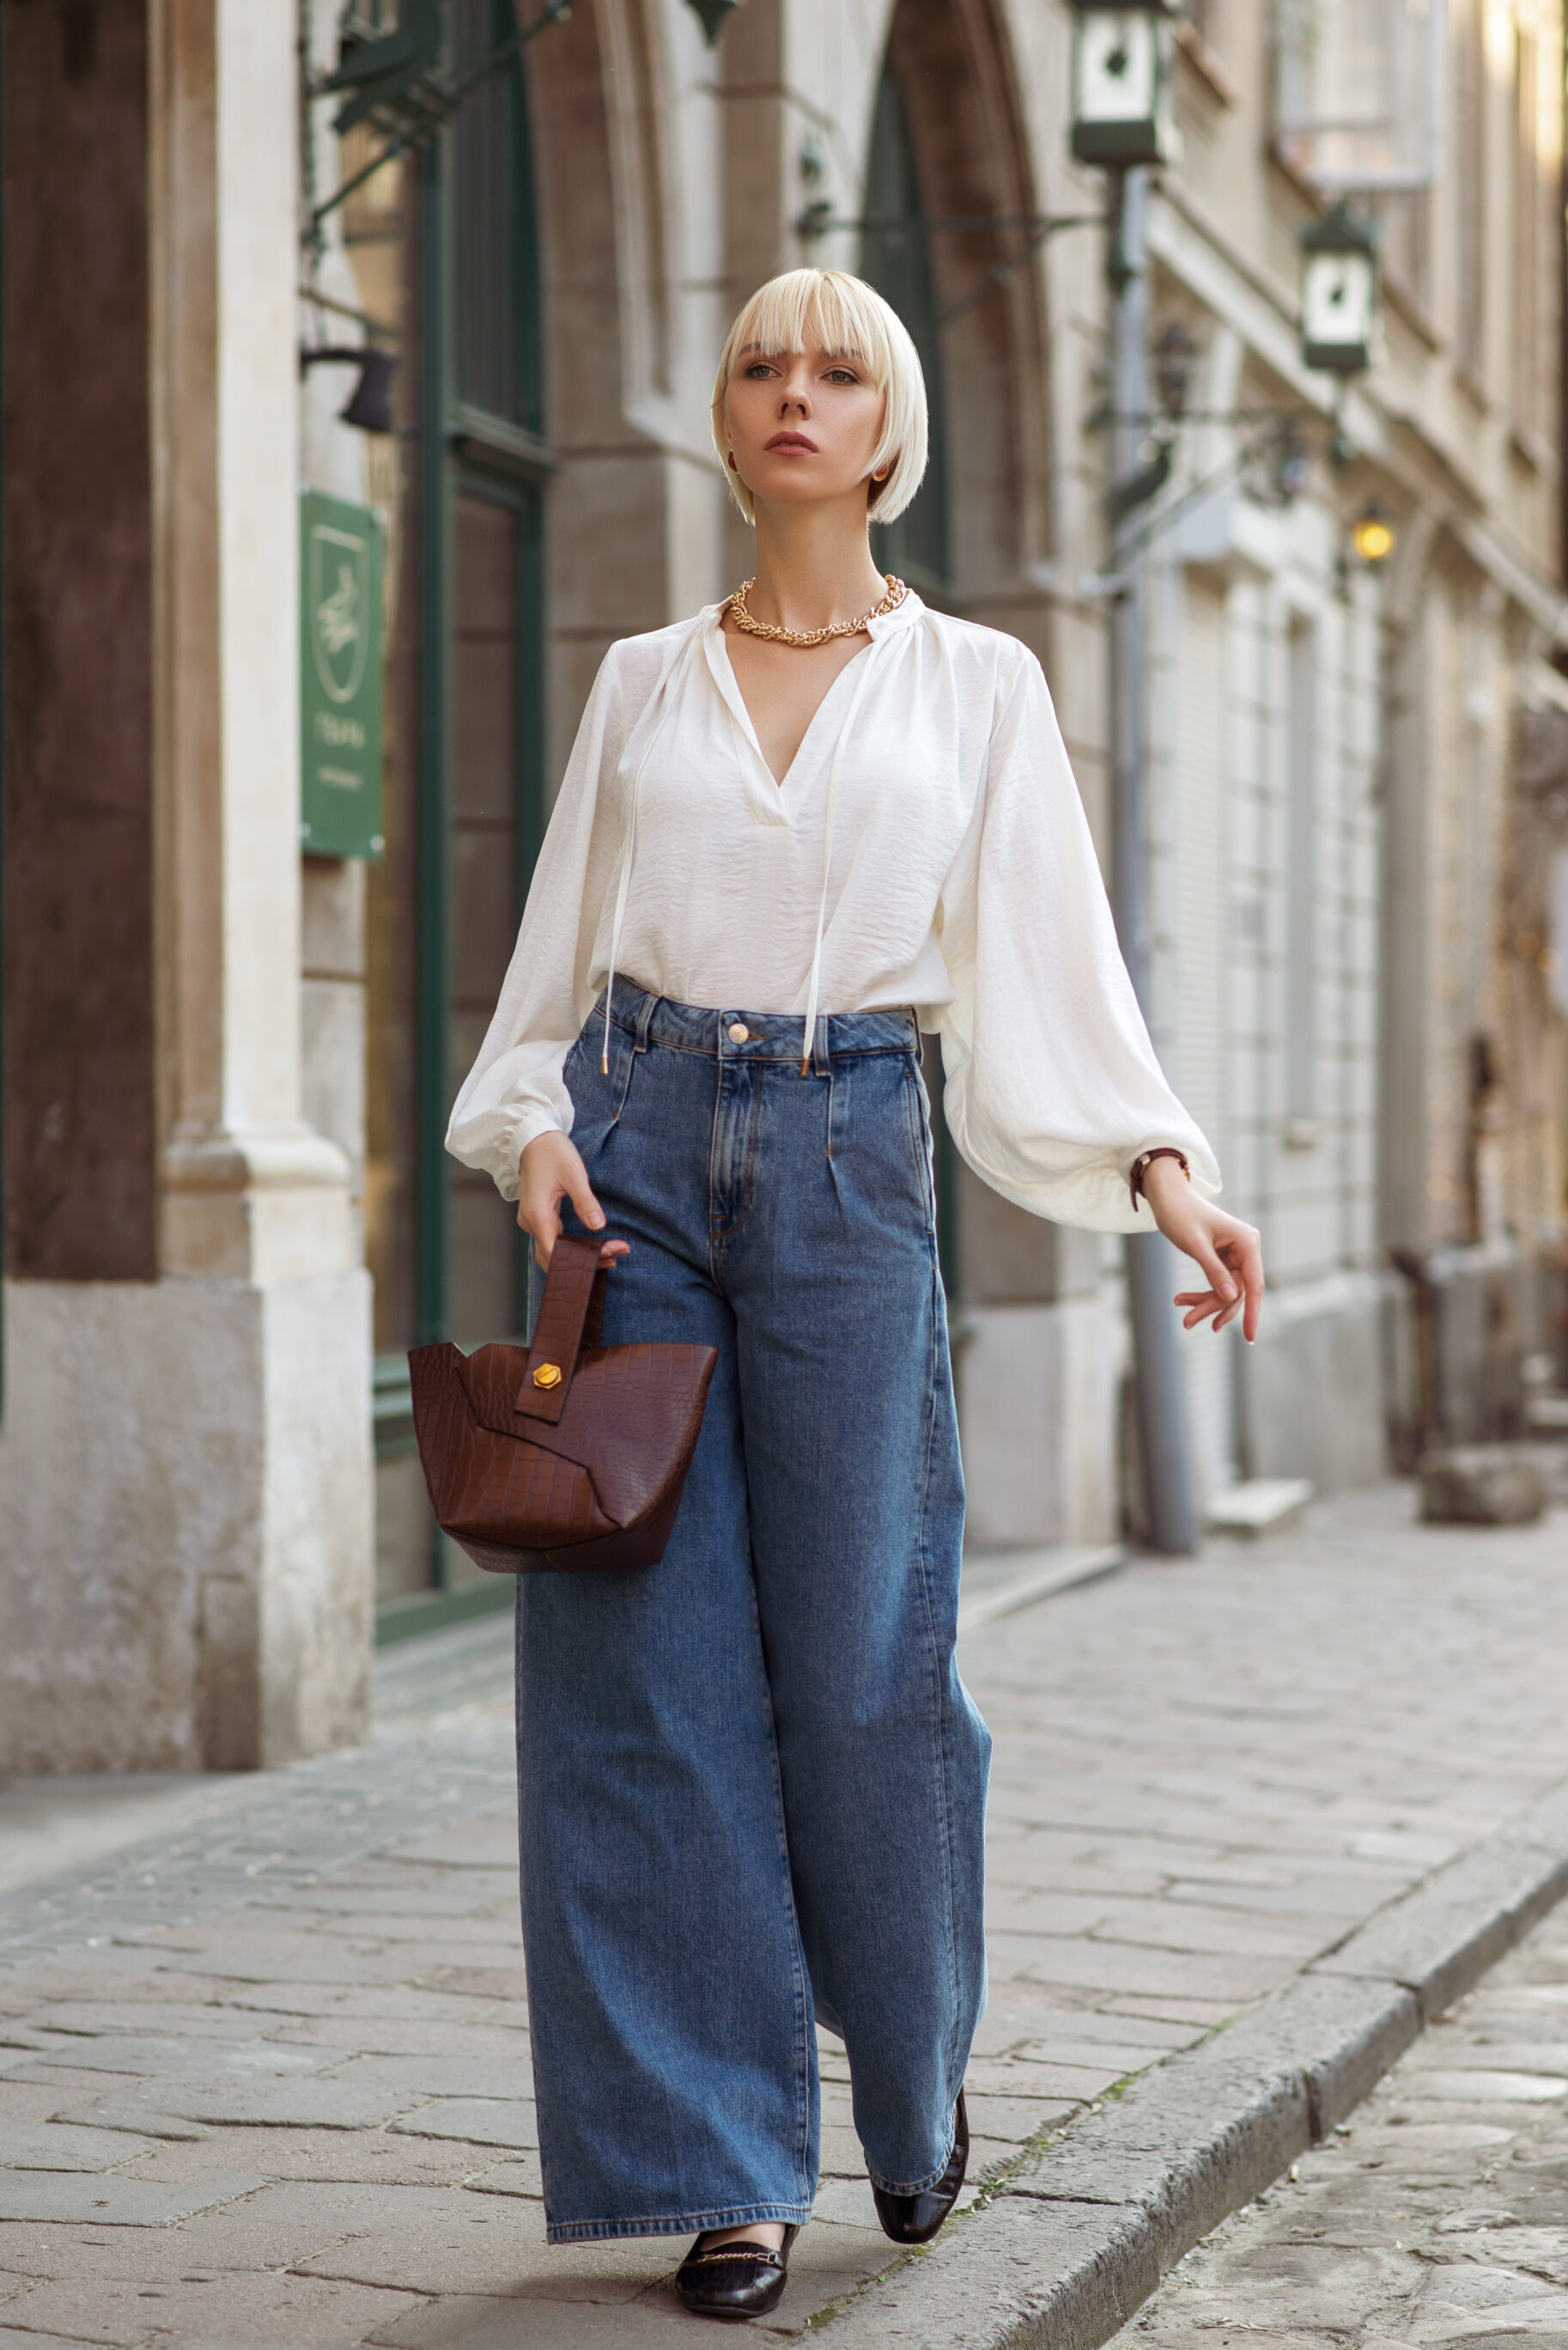 Puff Sleeves Tops, Wide-Leg Jeans, And Sneakers